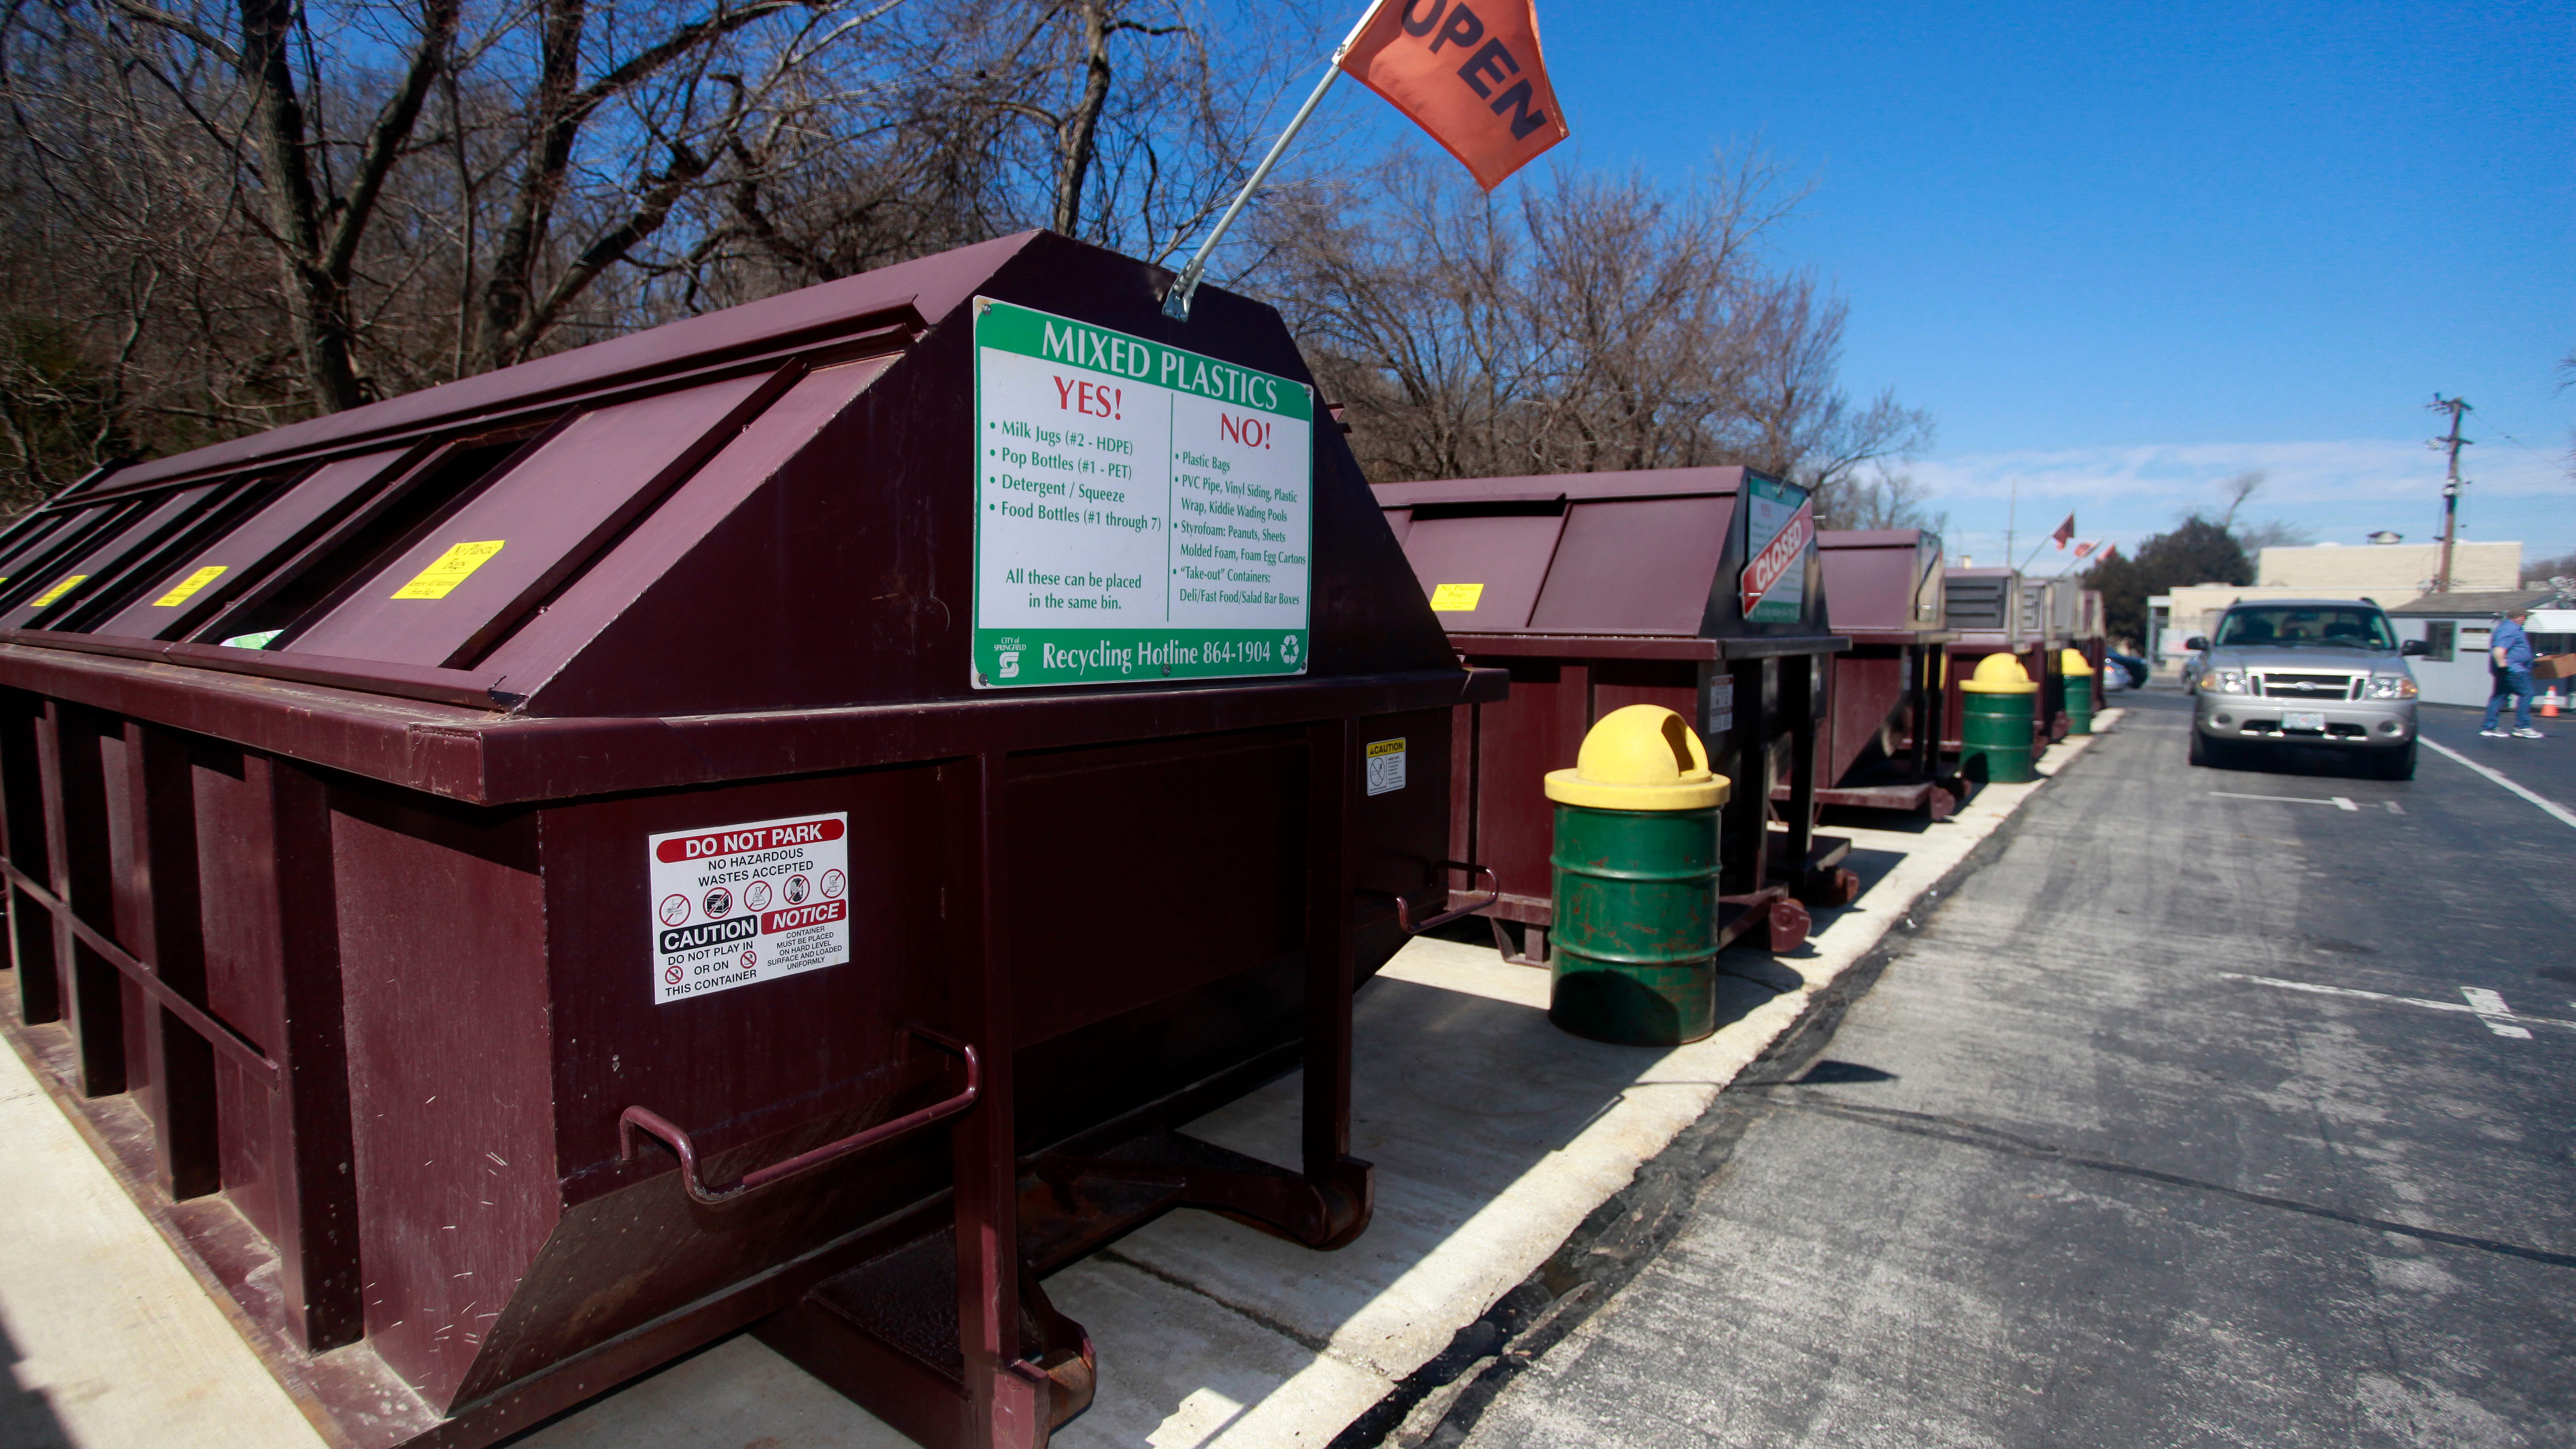 recycle center